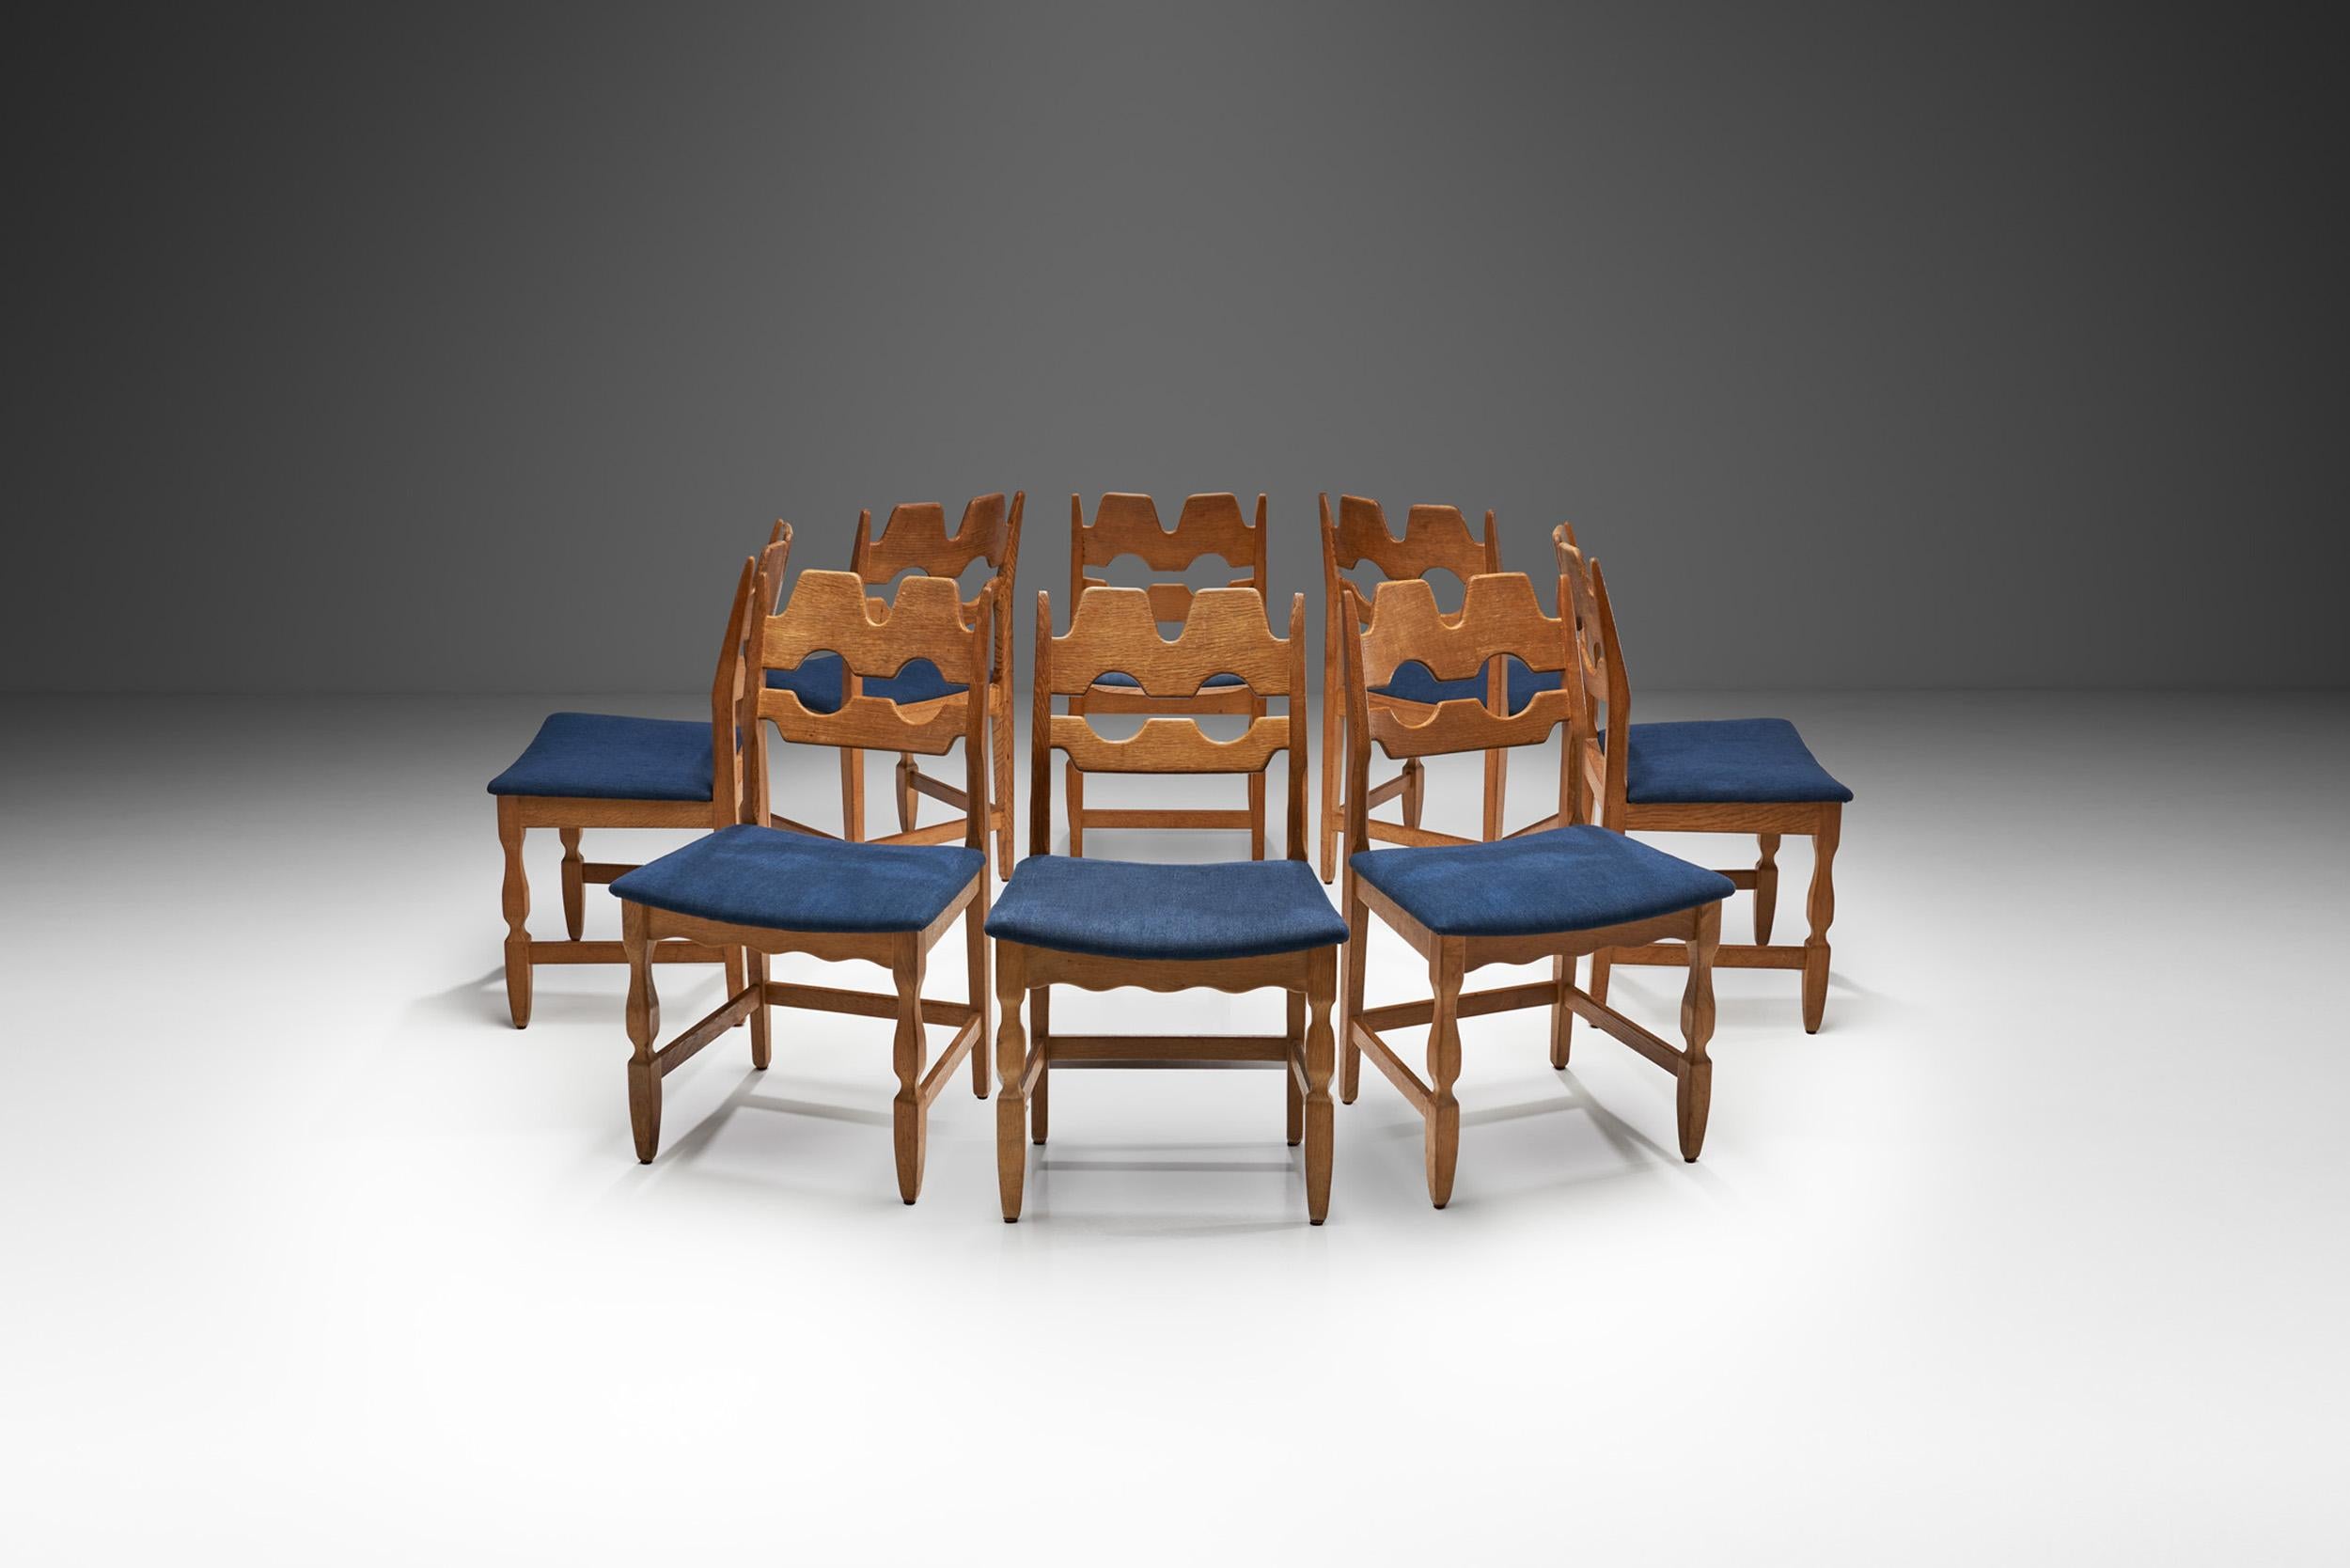 Henning Kjaernulf’s Razorblade chairs are the designer’s most distinctive designs. This set was manufactured by the Danish company EG Kvalitetsmobel in the 1960s, making it a true Danish mid-century set.
It is easy to see where the nickname of these